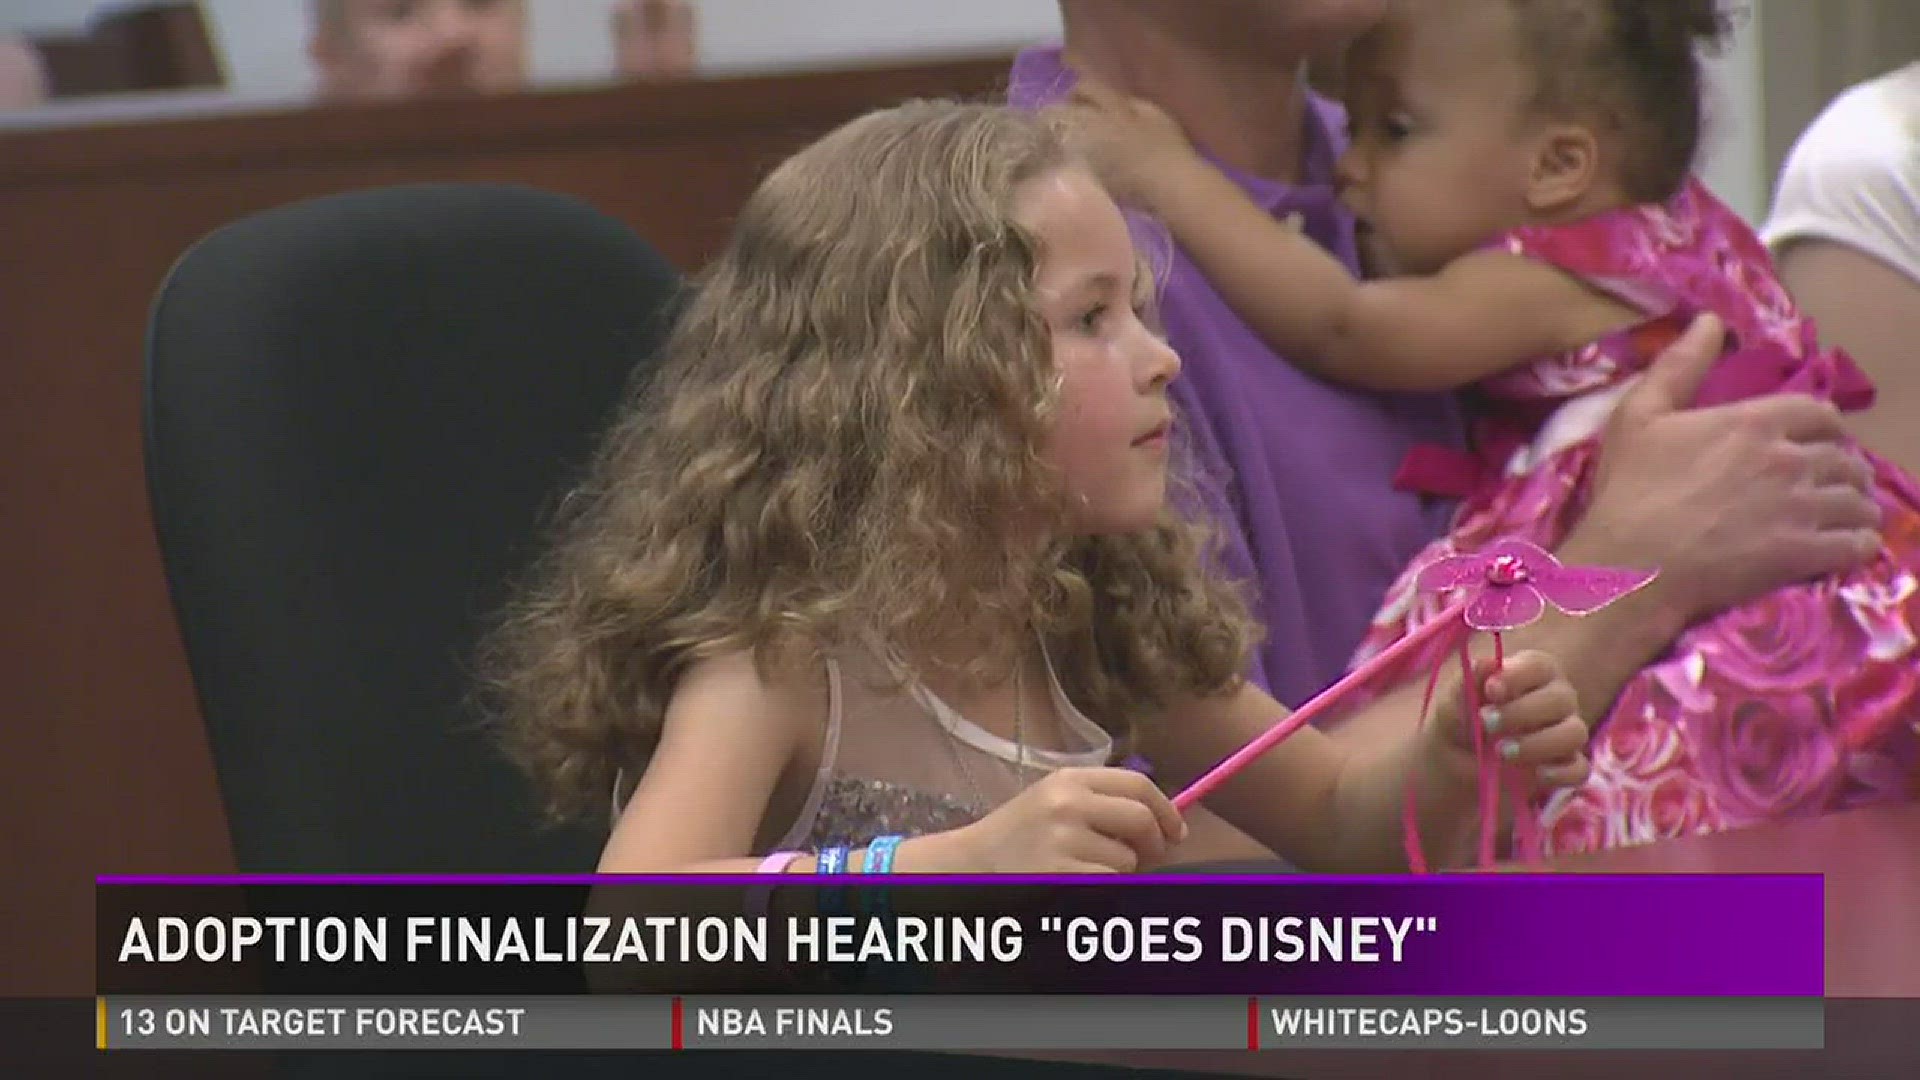 Disney World is known as the happiest place on Earth. Today, it was replaced by Courtroom 9-D.